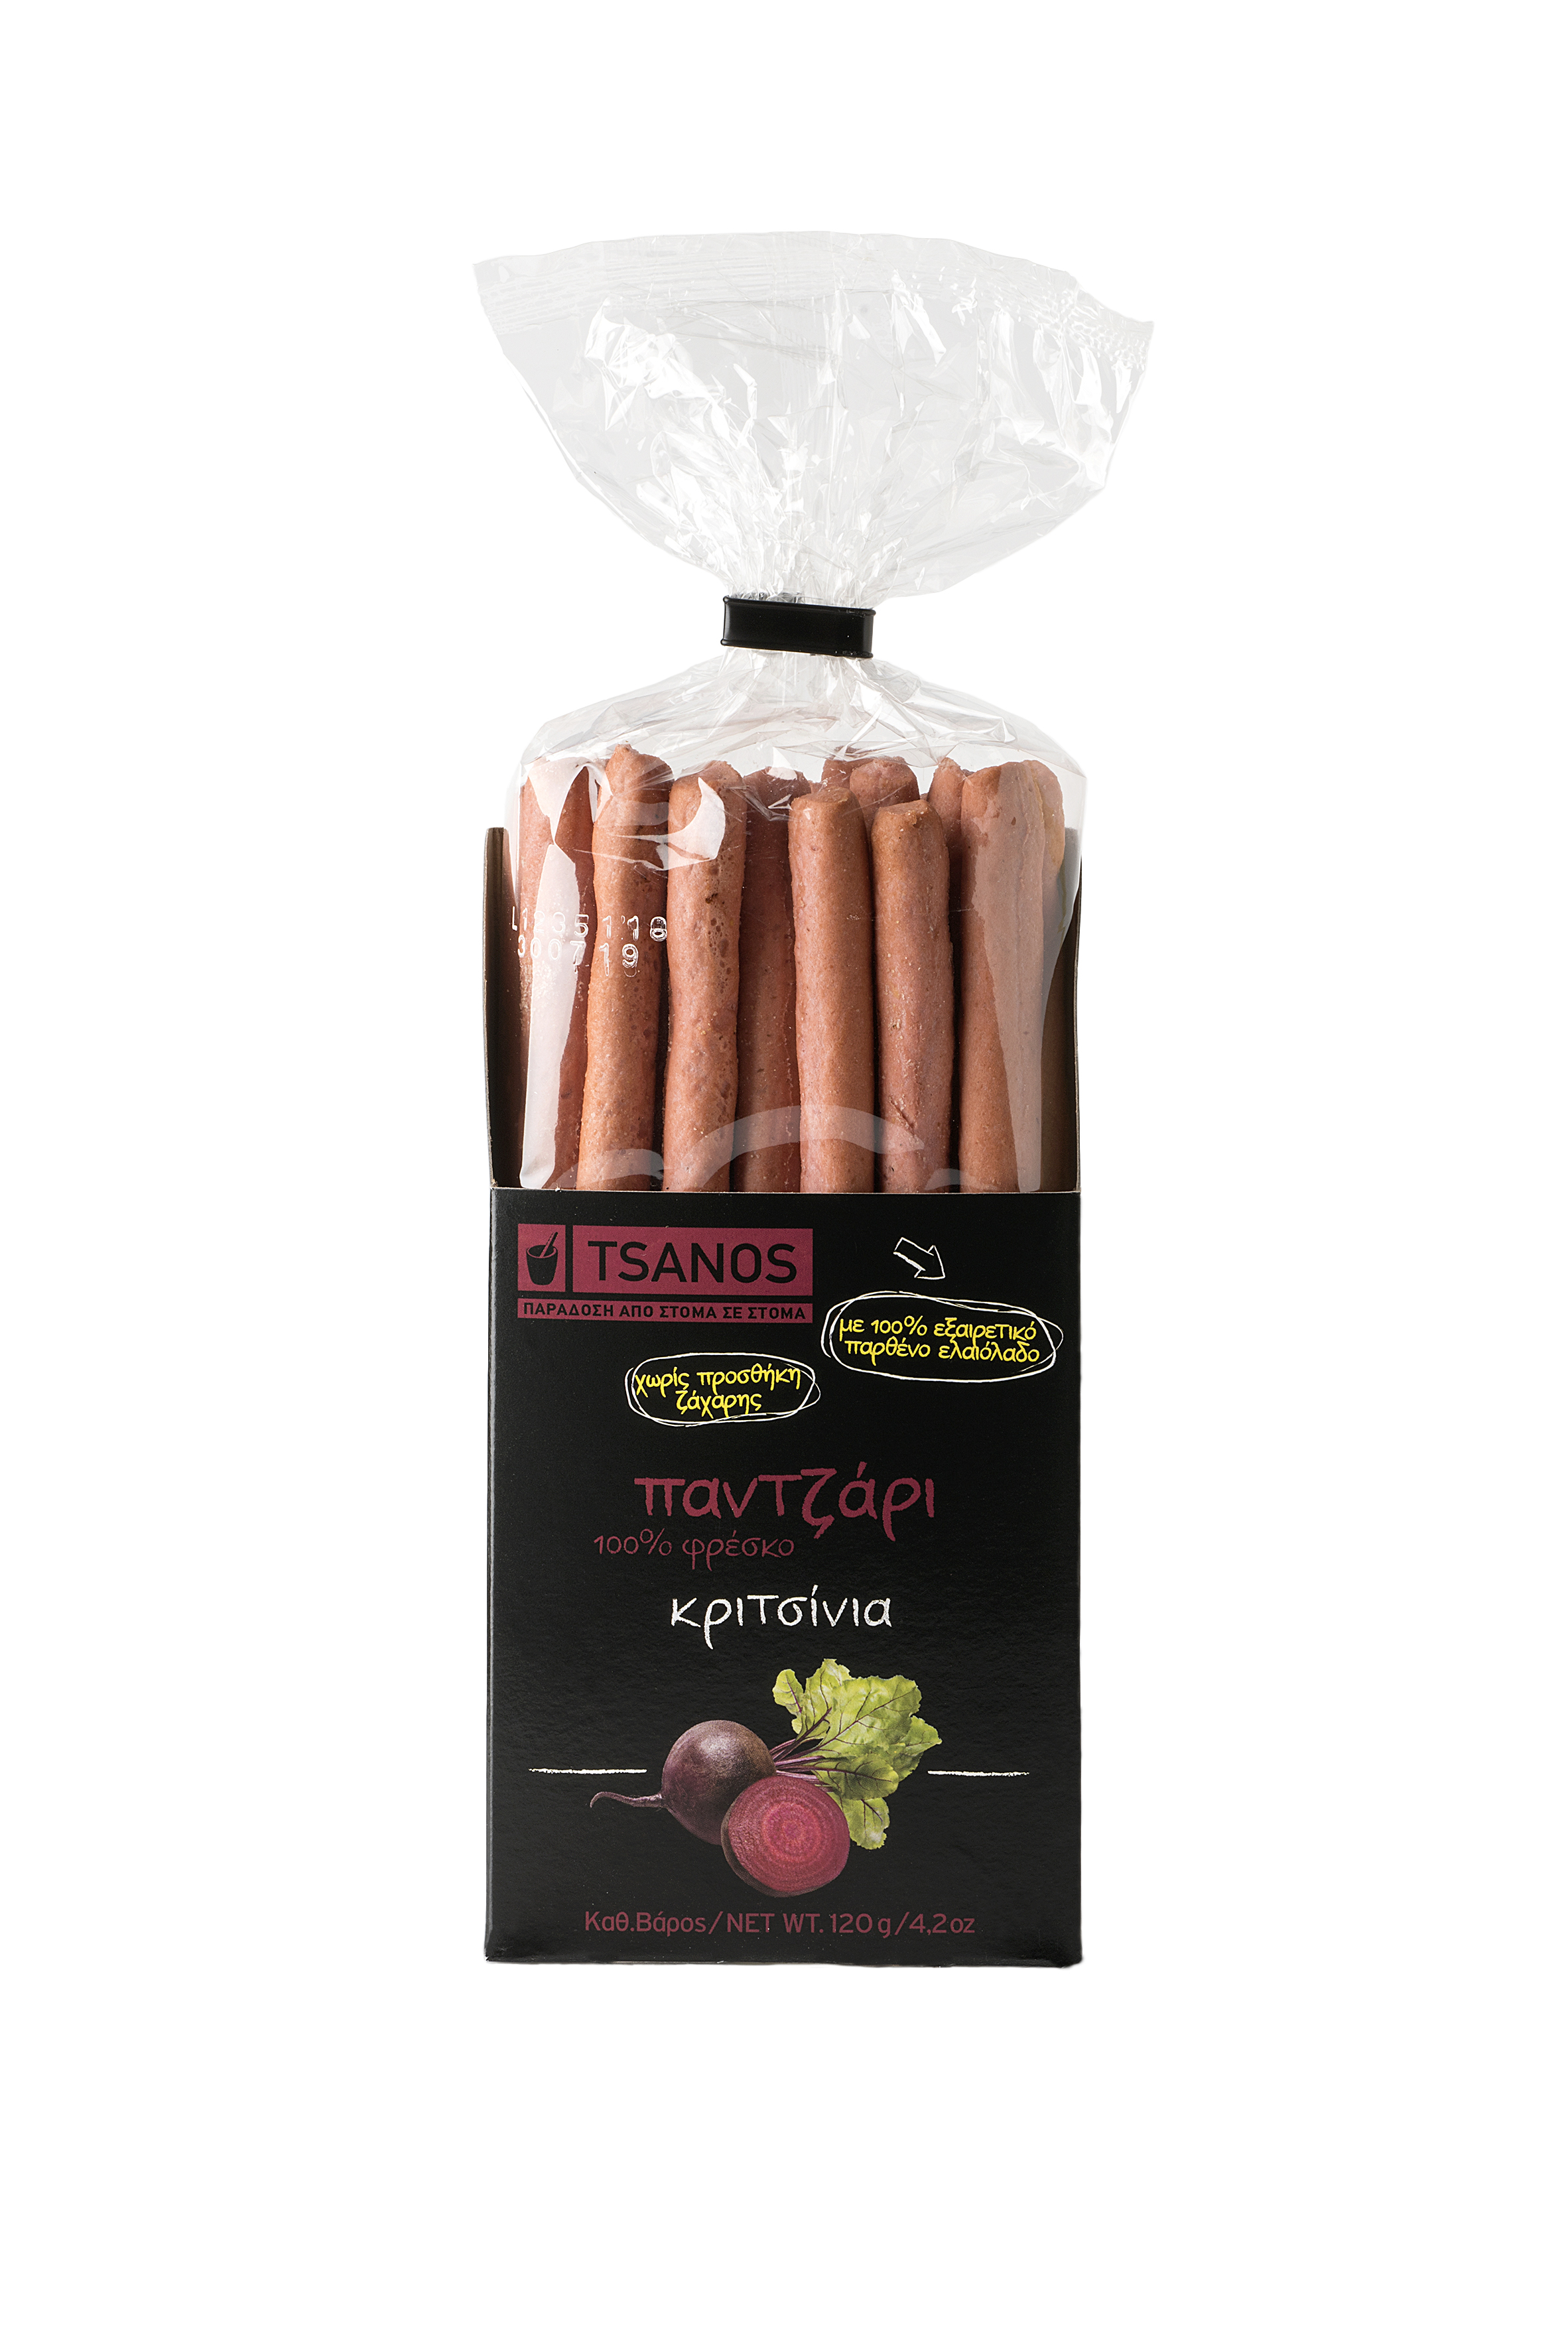 Breadsticks with beetroot